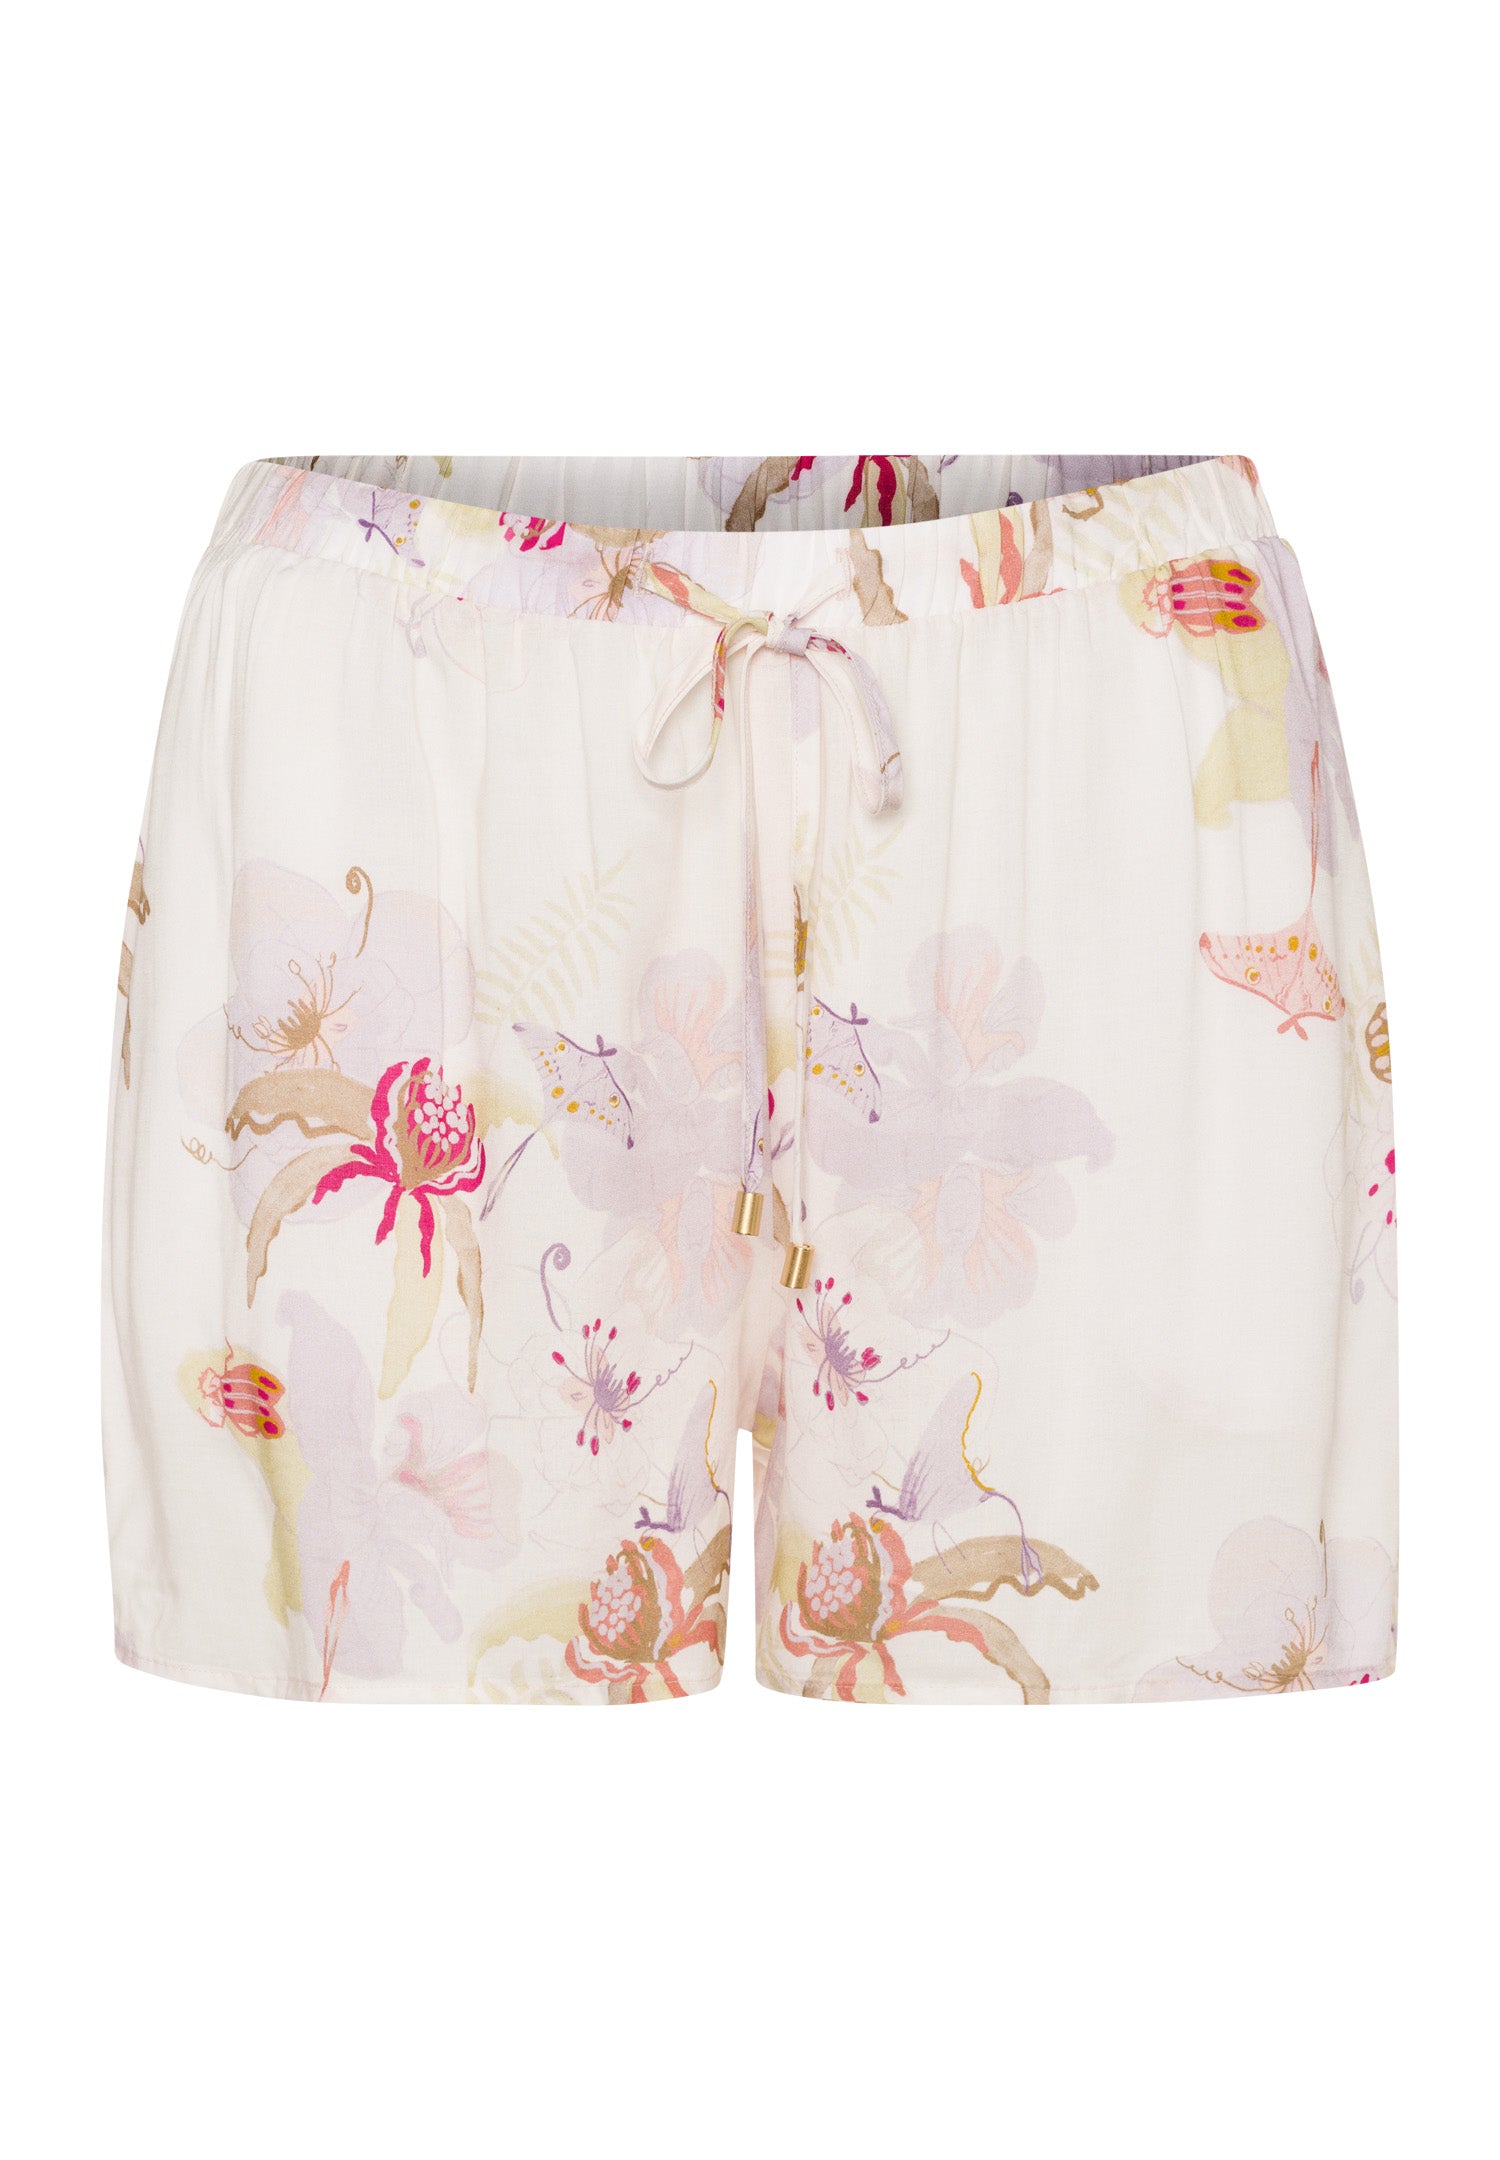 77615 Sleep And Lounge Woven Shorts - 2956 Bustling Garden